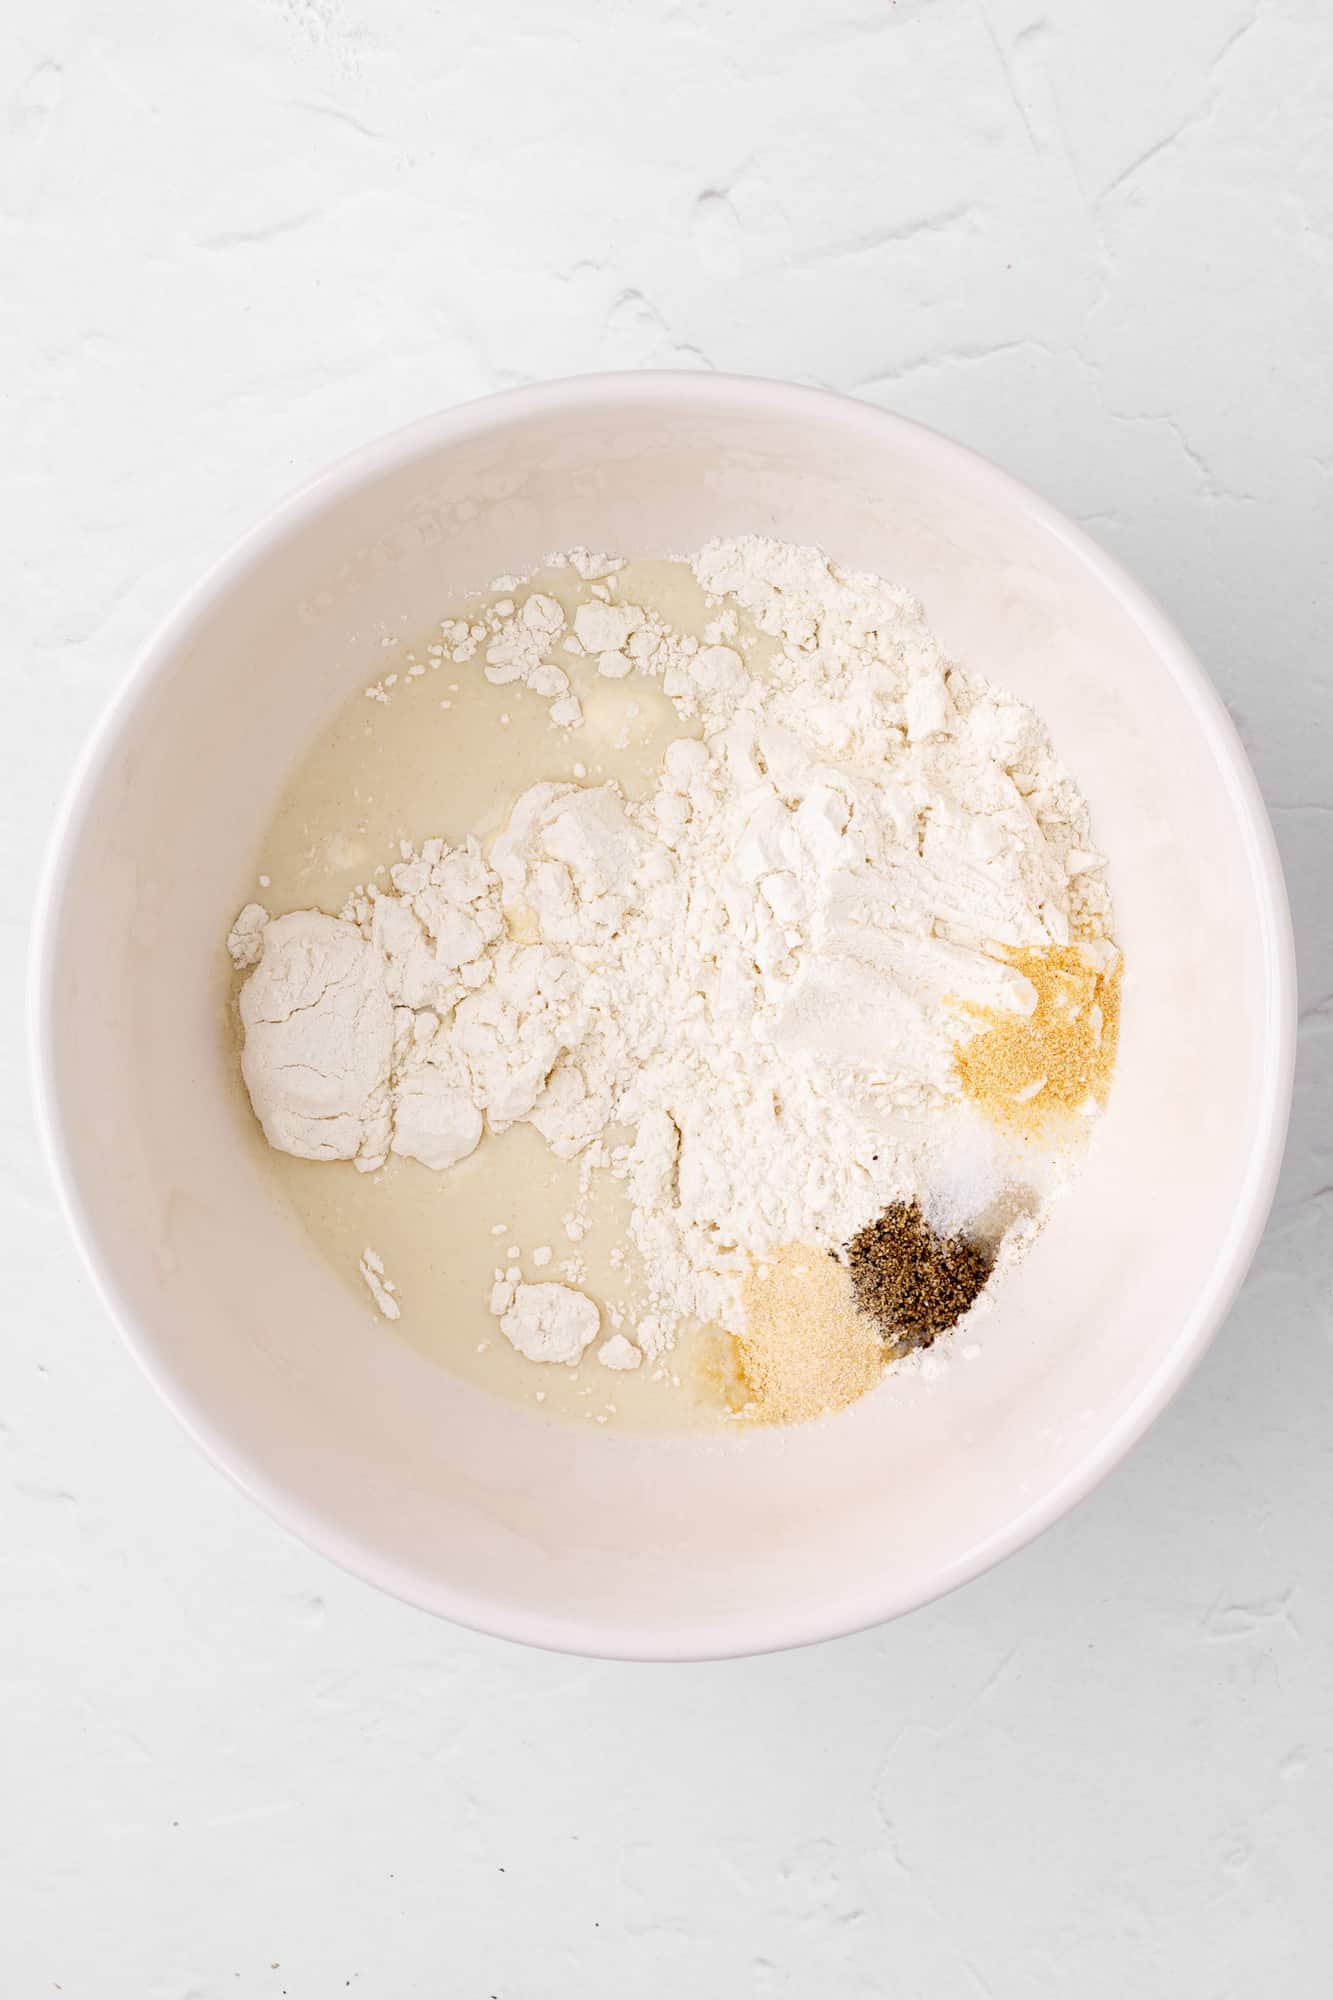 batter ingredients in a bowl - milk, flour, and spices